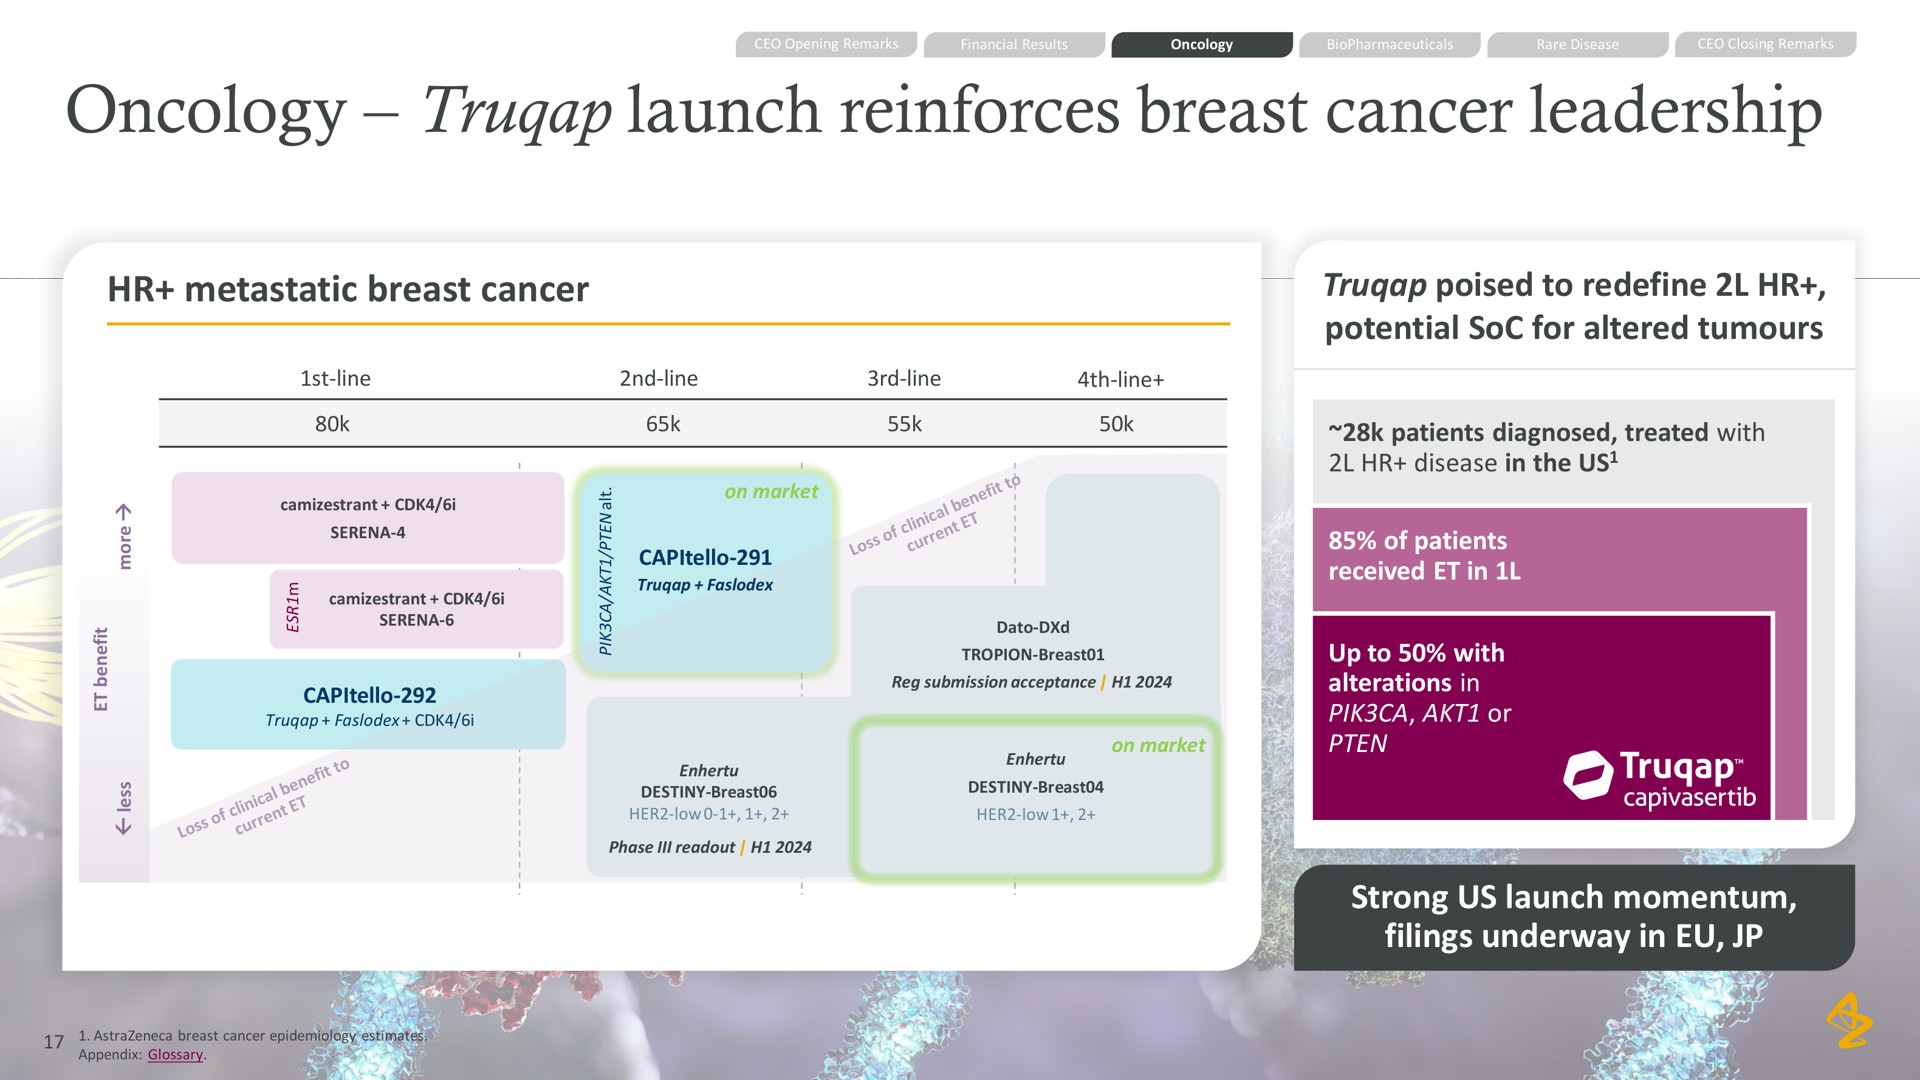 oncology launch reinforces breast cancer leadership metastatic breast cancer poised to redefine potential soc for altered strong us launch momentum filings underway in | AstraZeneca